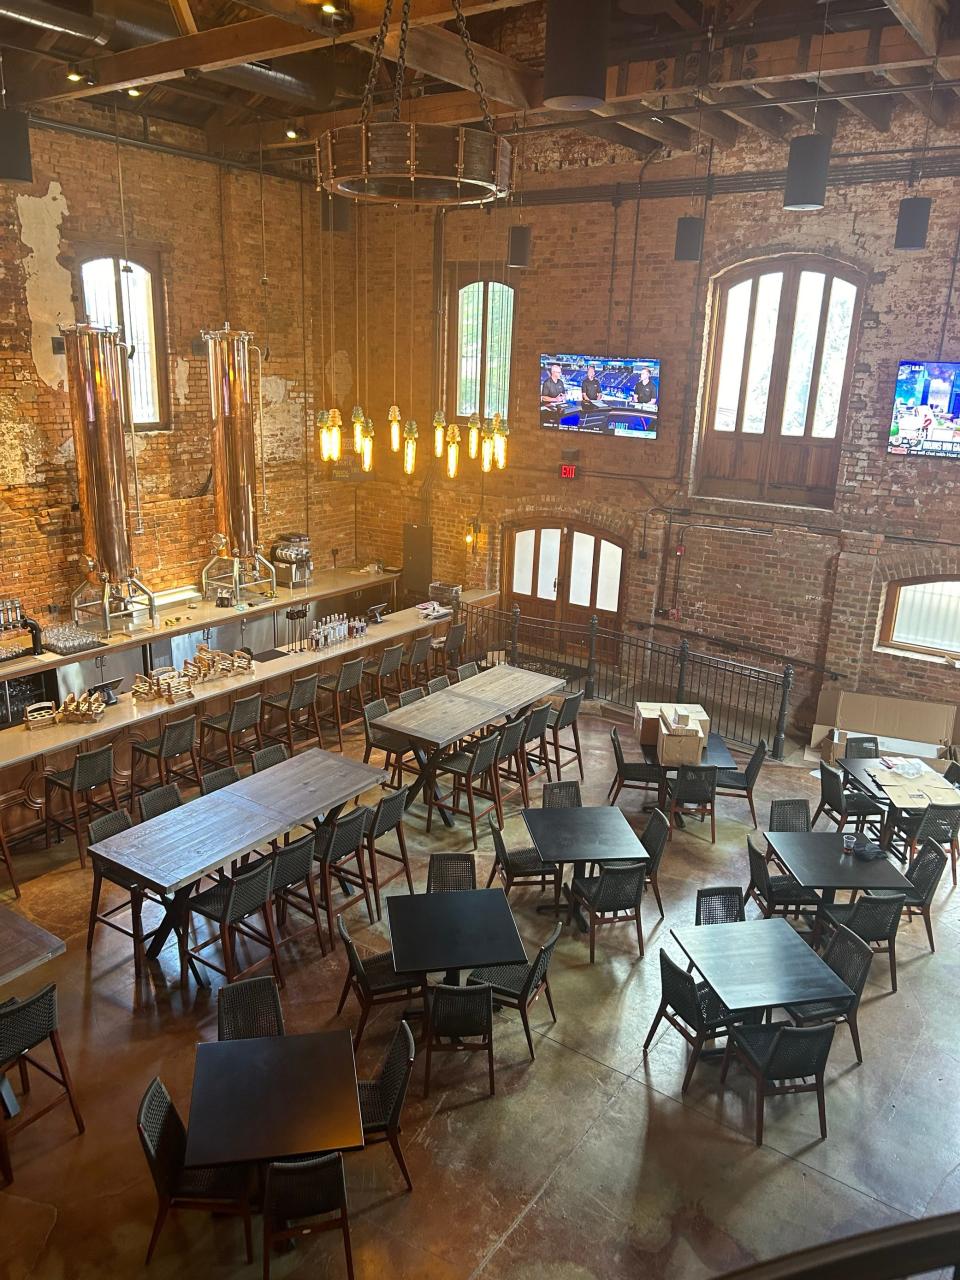 Downstairs seating area at New Realm Brewing Company in Greenville, S.C.